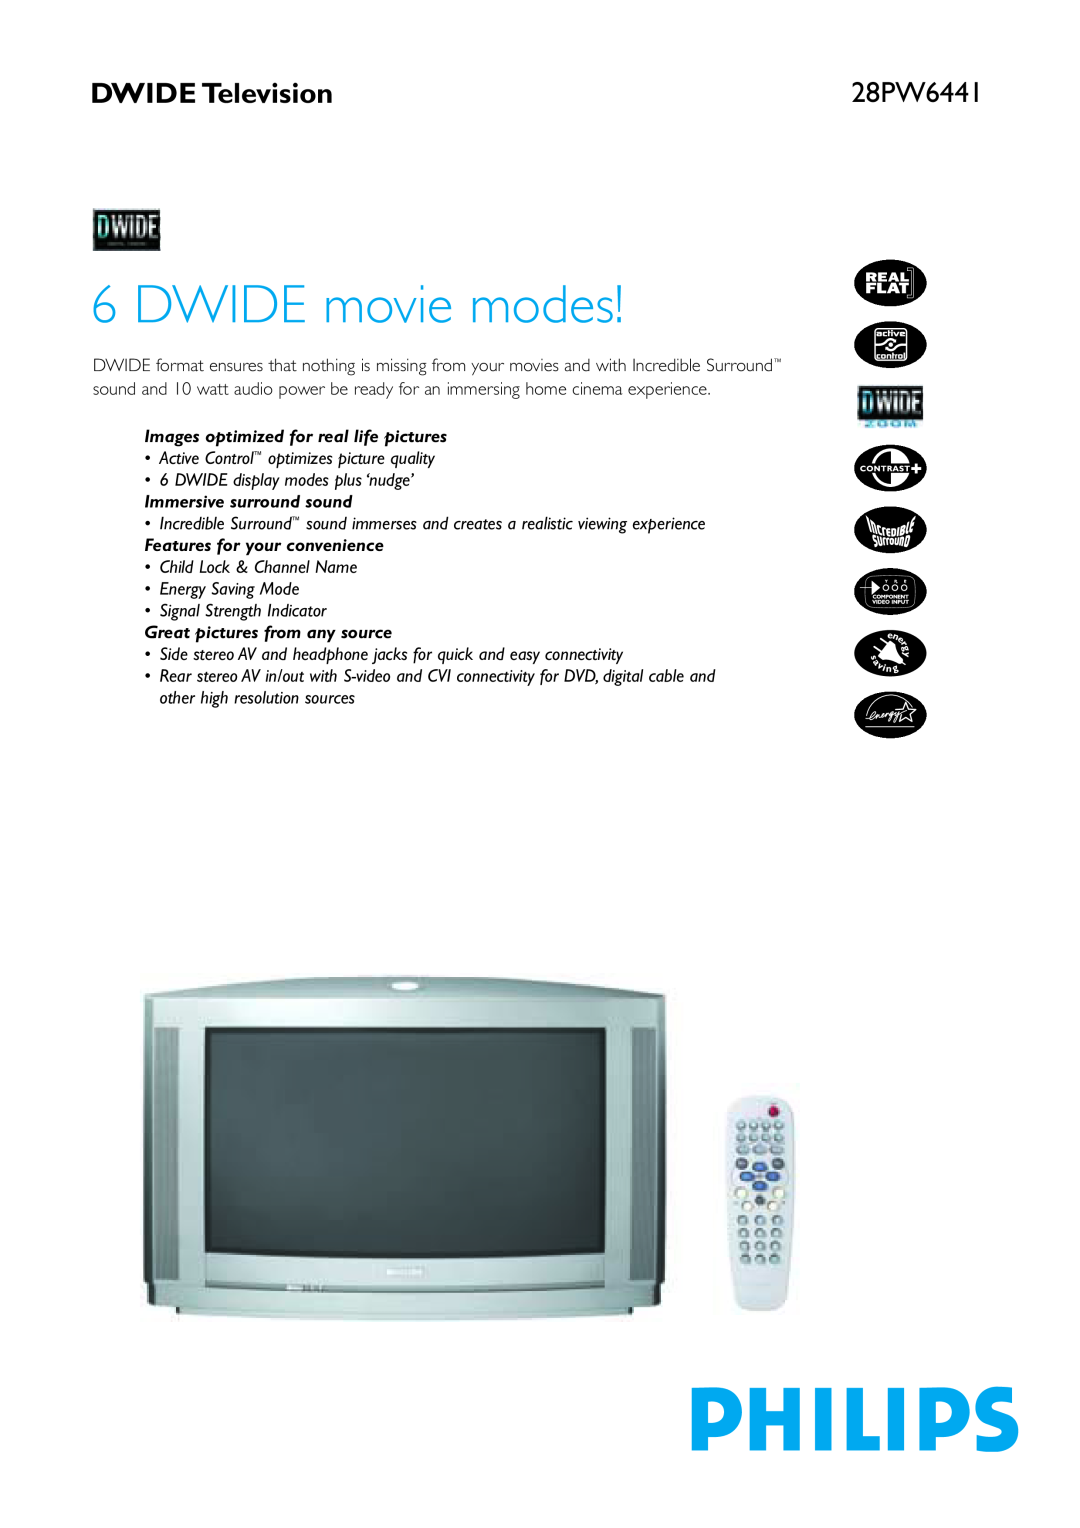 Philips 28PW6441 manual DWIDE Television, DWIDE movie modes, Images optimized for real life pictures 